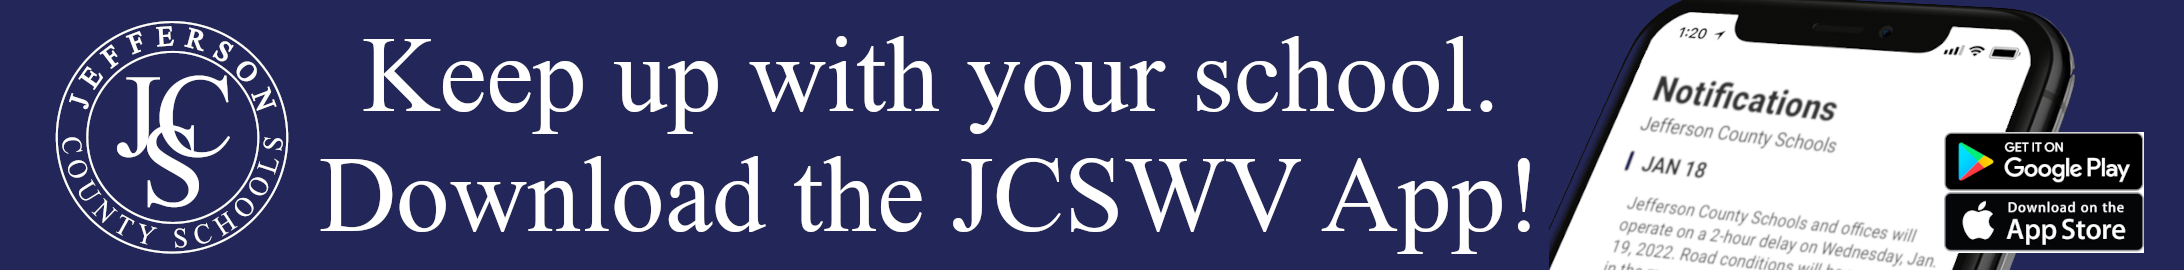 Keep up with your school. Download the JCSWV App!